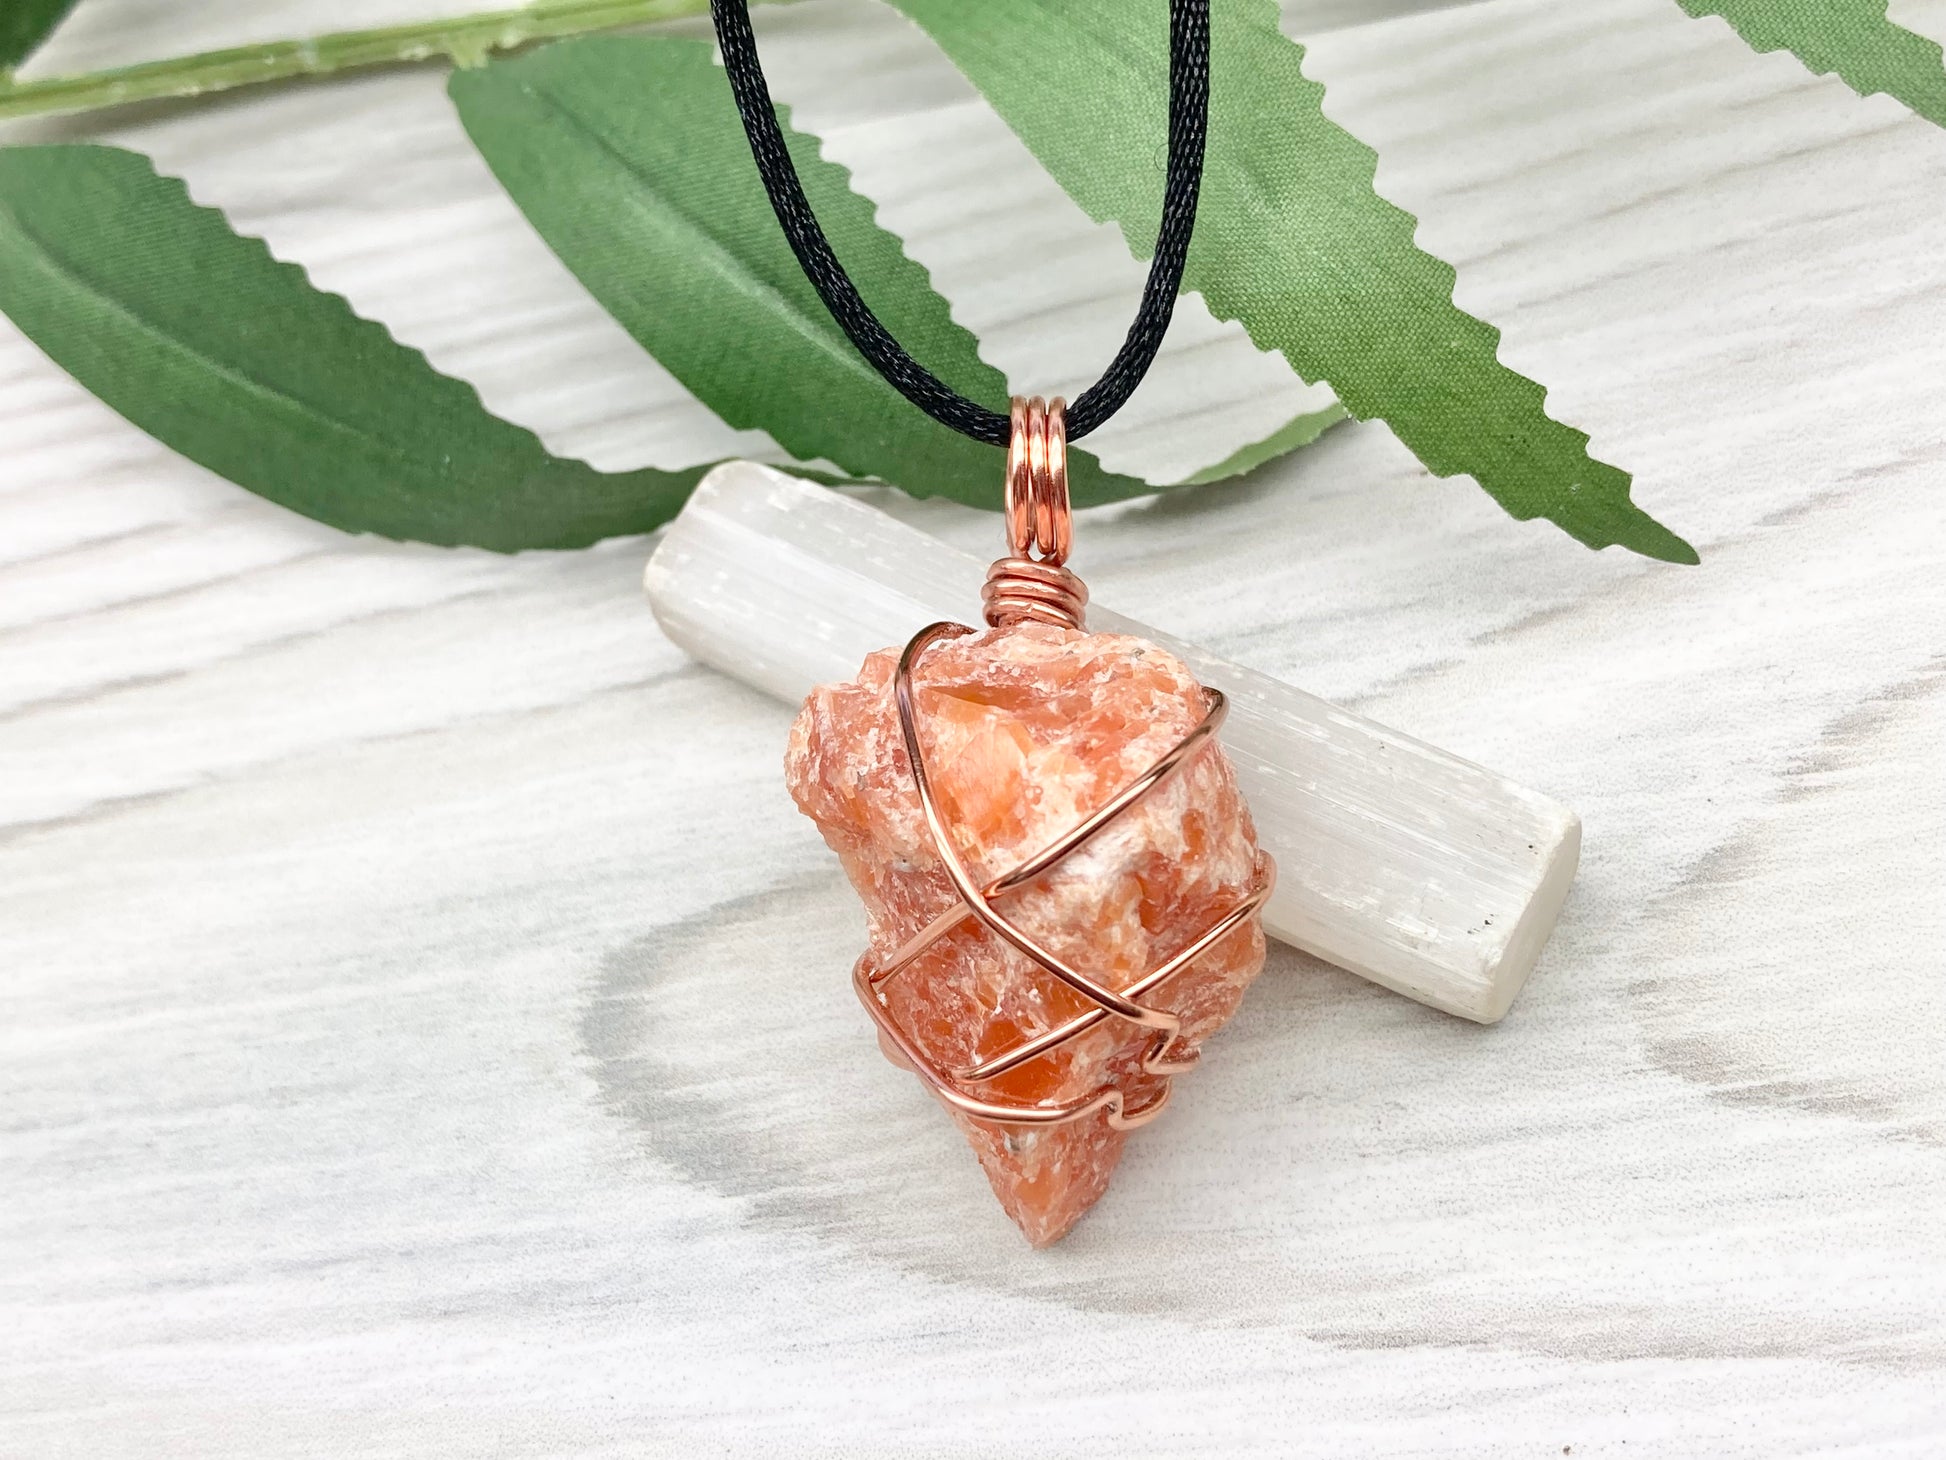 Orange Calcite Necklace. Raw Orange Calcite Crystal Wrapped With Copper Wire That Is Tarnish Resistant. Comes On A Black Necklace. Gemini Zodiac Stone Pendant. Handmade In Tennessee. Pagan Spiritual Jewelry.